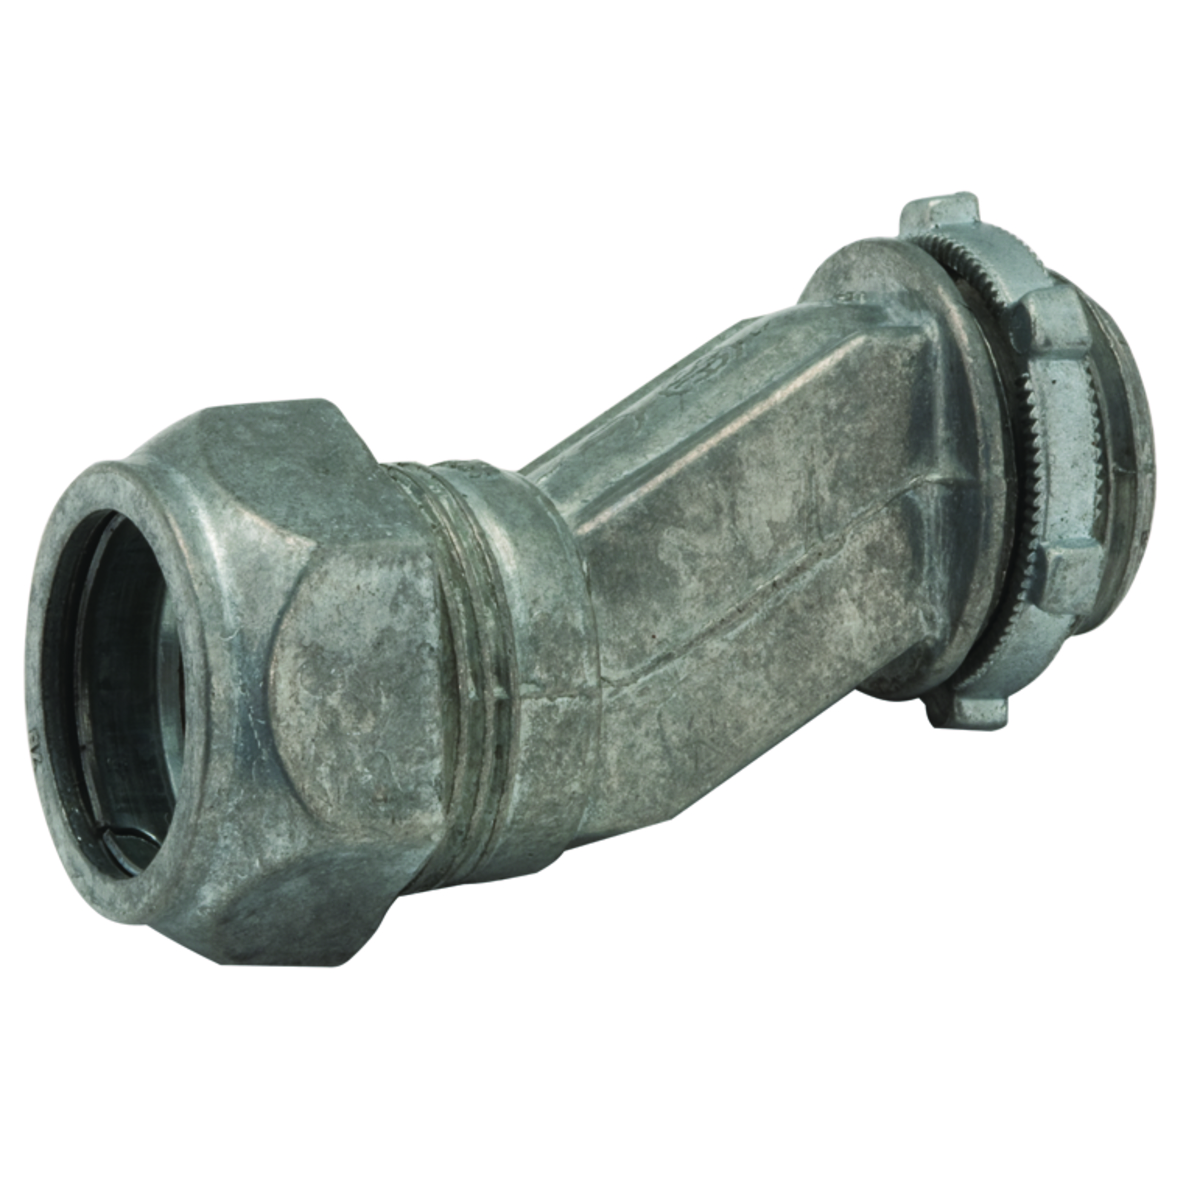 Offset Connector, Uninsulated Die Cast Zinc, 3/4 In. Trade Size